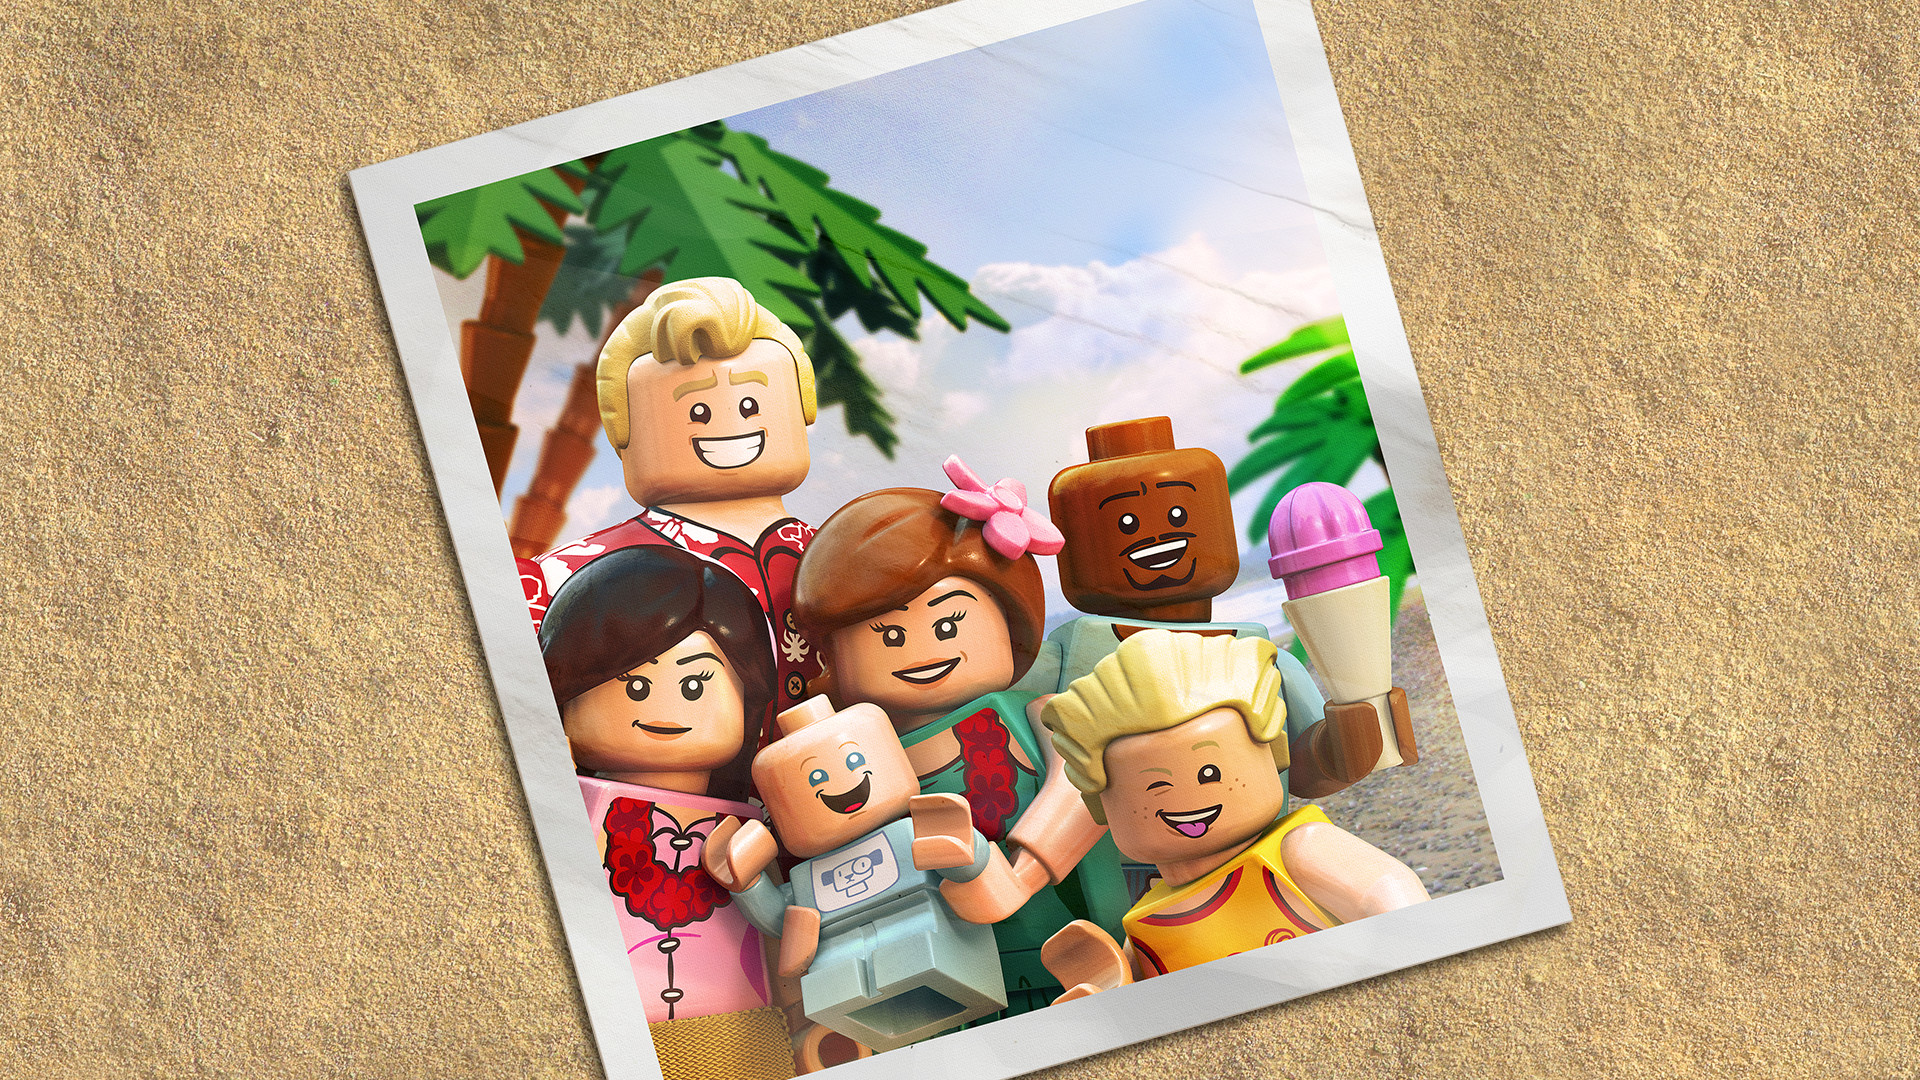 LEGO THE INCREDIBLES - Parr Family Vacation Character Pack DLC EU PS5 CD Key $0.73